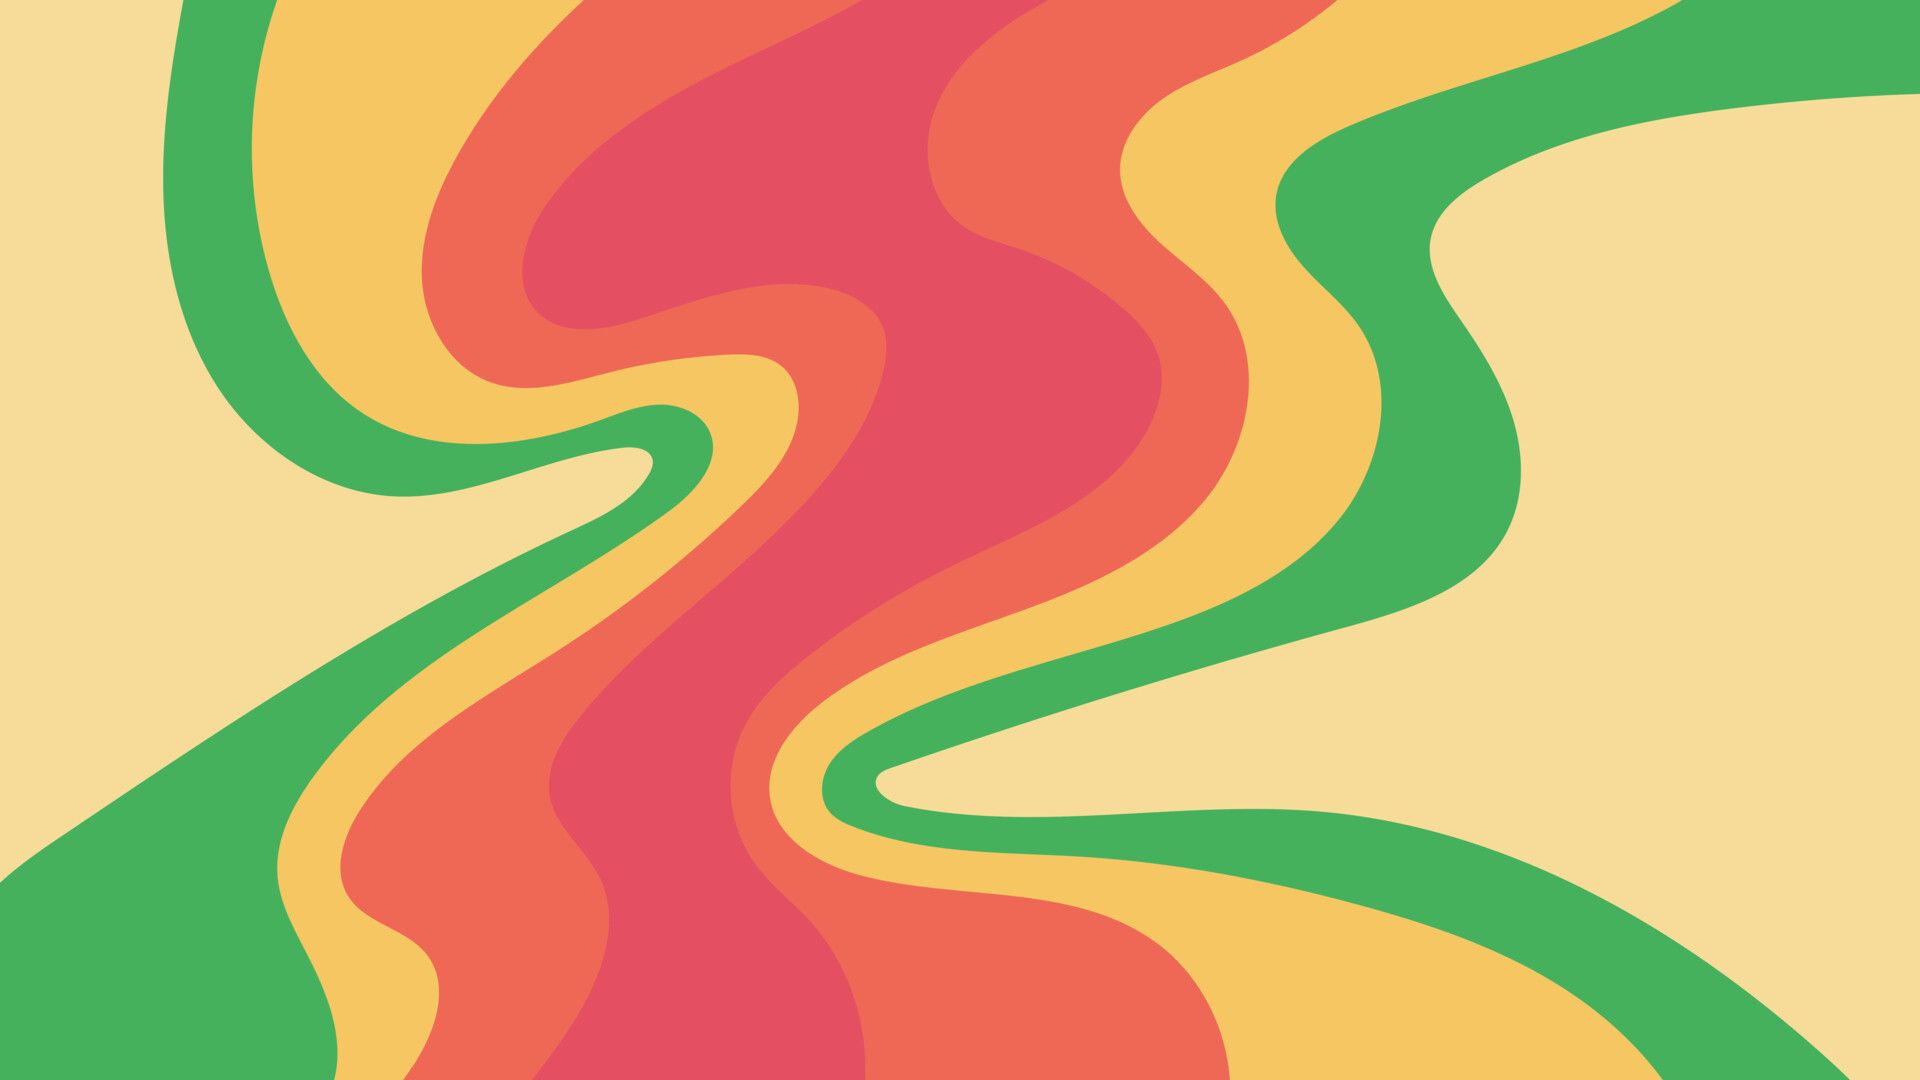 Groovy retro background with groovy swirls and a yellow background - 60s